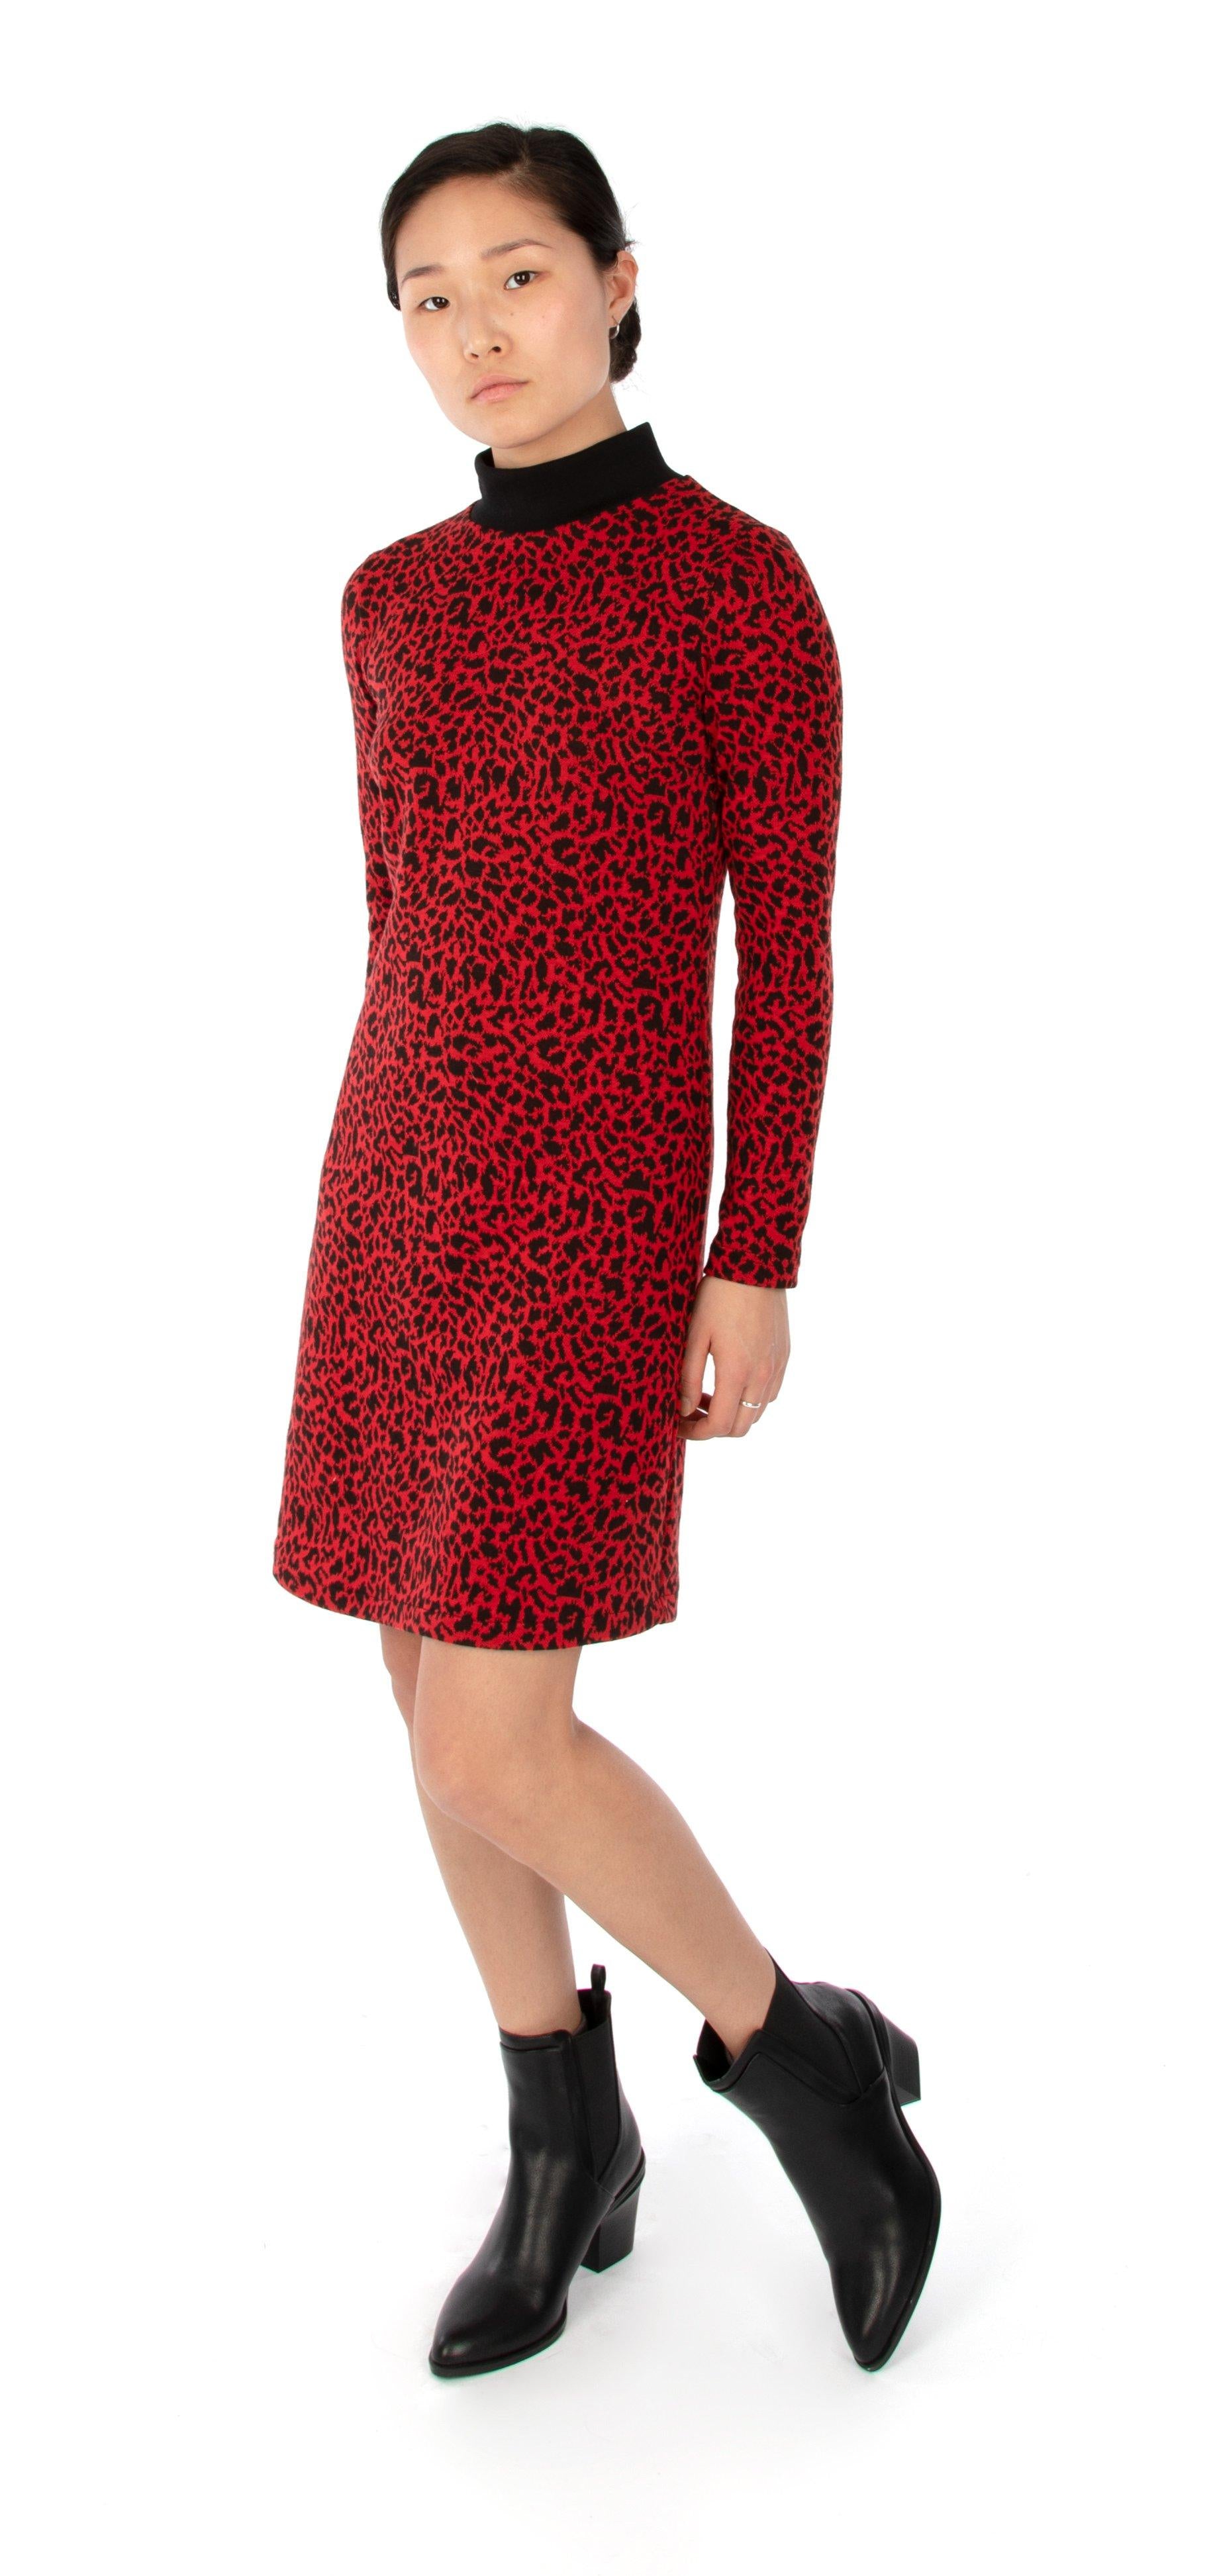 Jalie 3903 Dress (view C) in a sweater knit